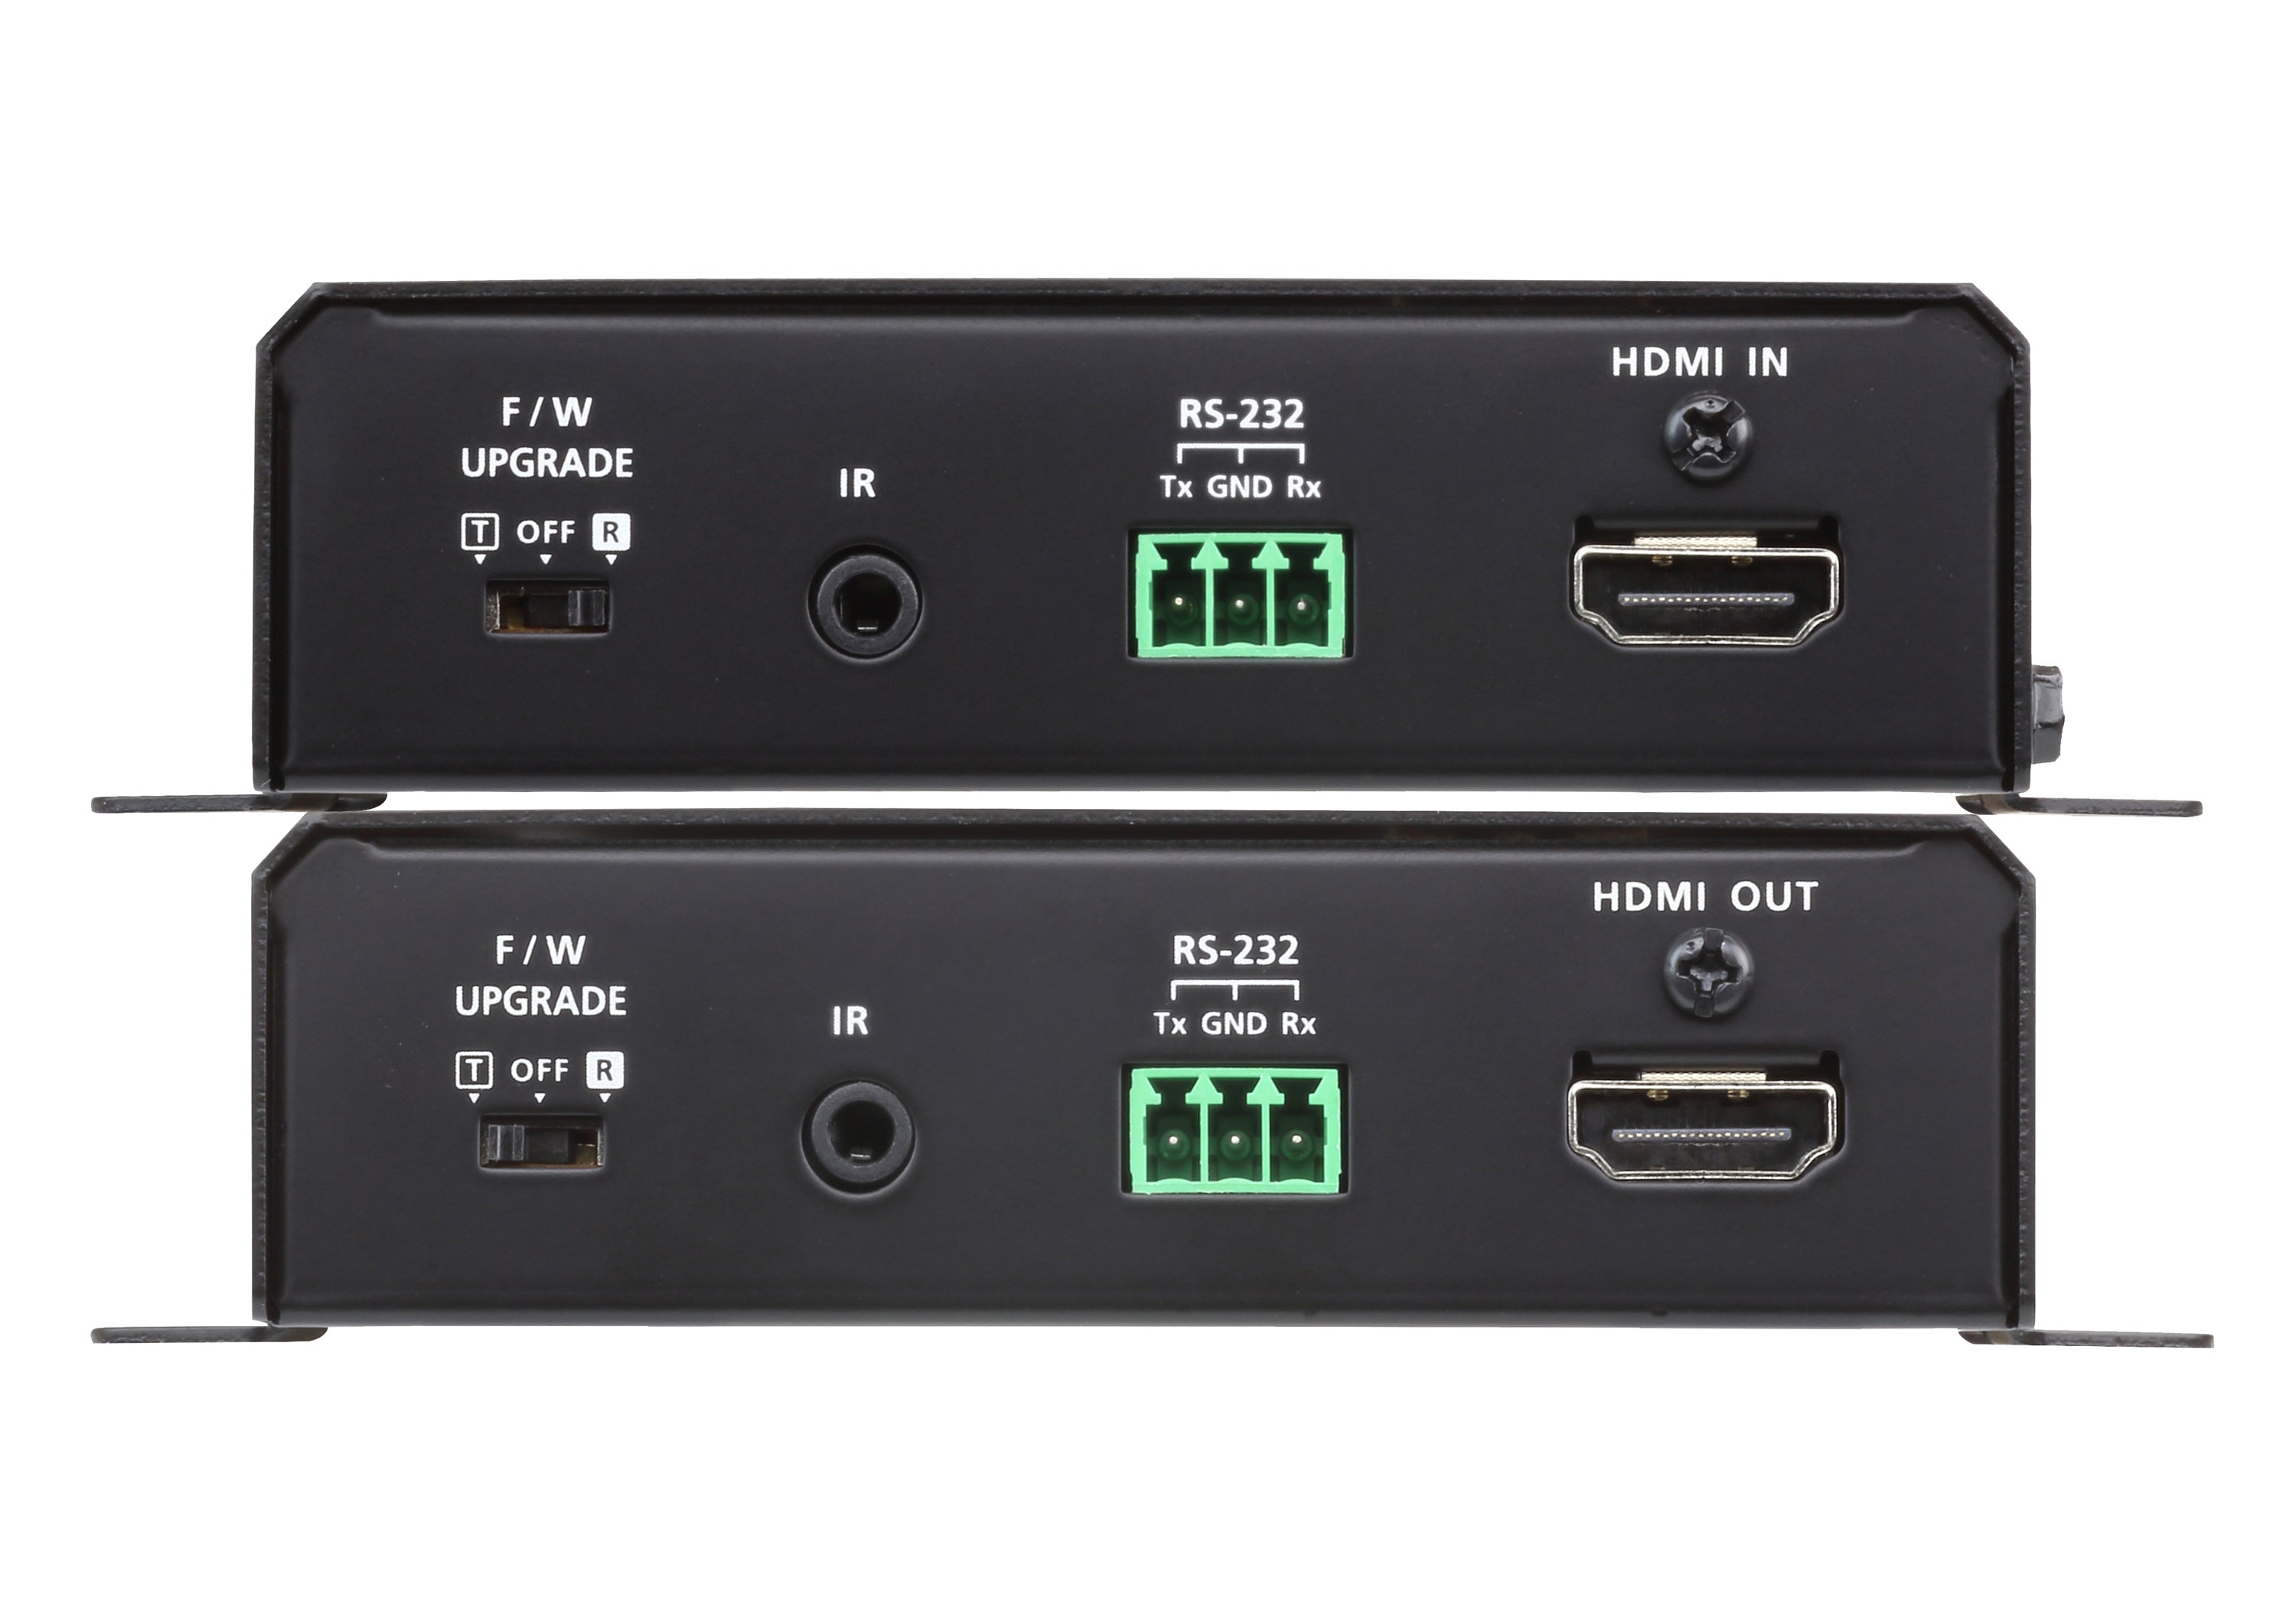 Aten HDMI HDBaseT Extender with PoH (4K@100m) (HDBaseT Class A) -VE1812 (3 Year Manufacture Local Warranty In Singapore)